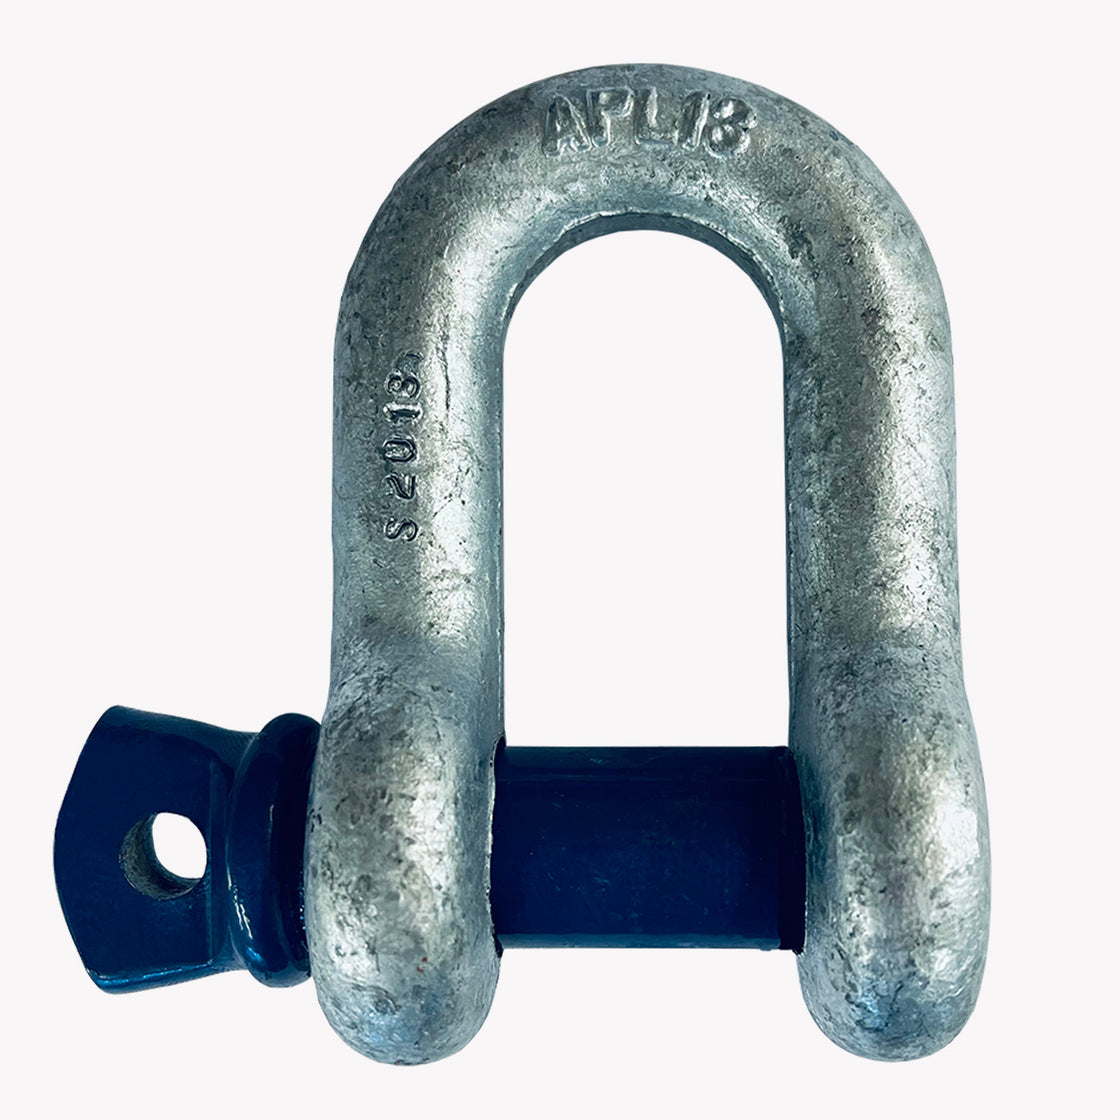 DROP FORGED SCREW PIN DEE SHACKLE - US FEDERAL SPECIFICATION - PGS Supplies 21 Ltd